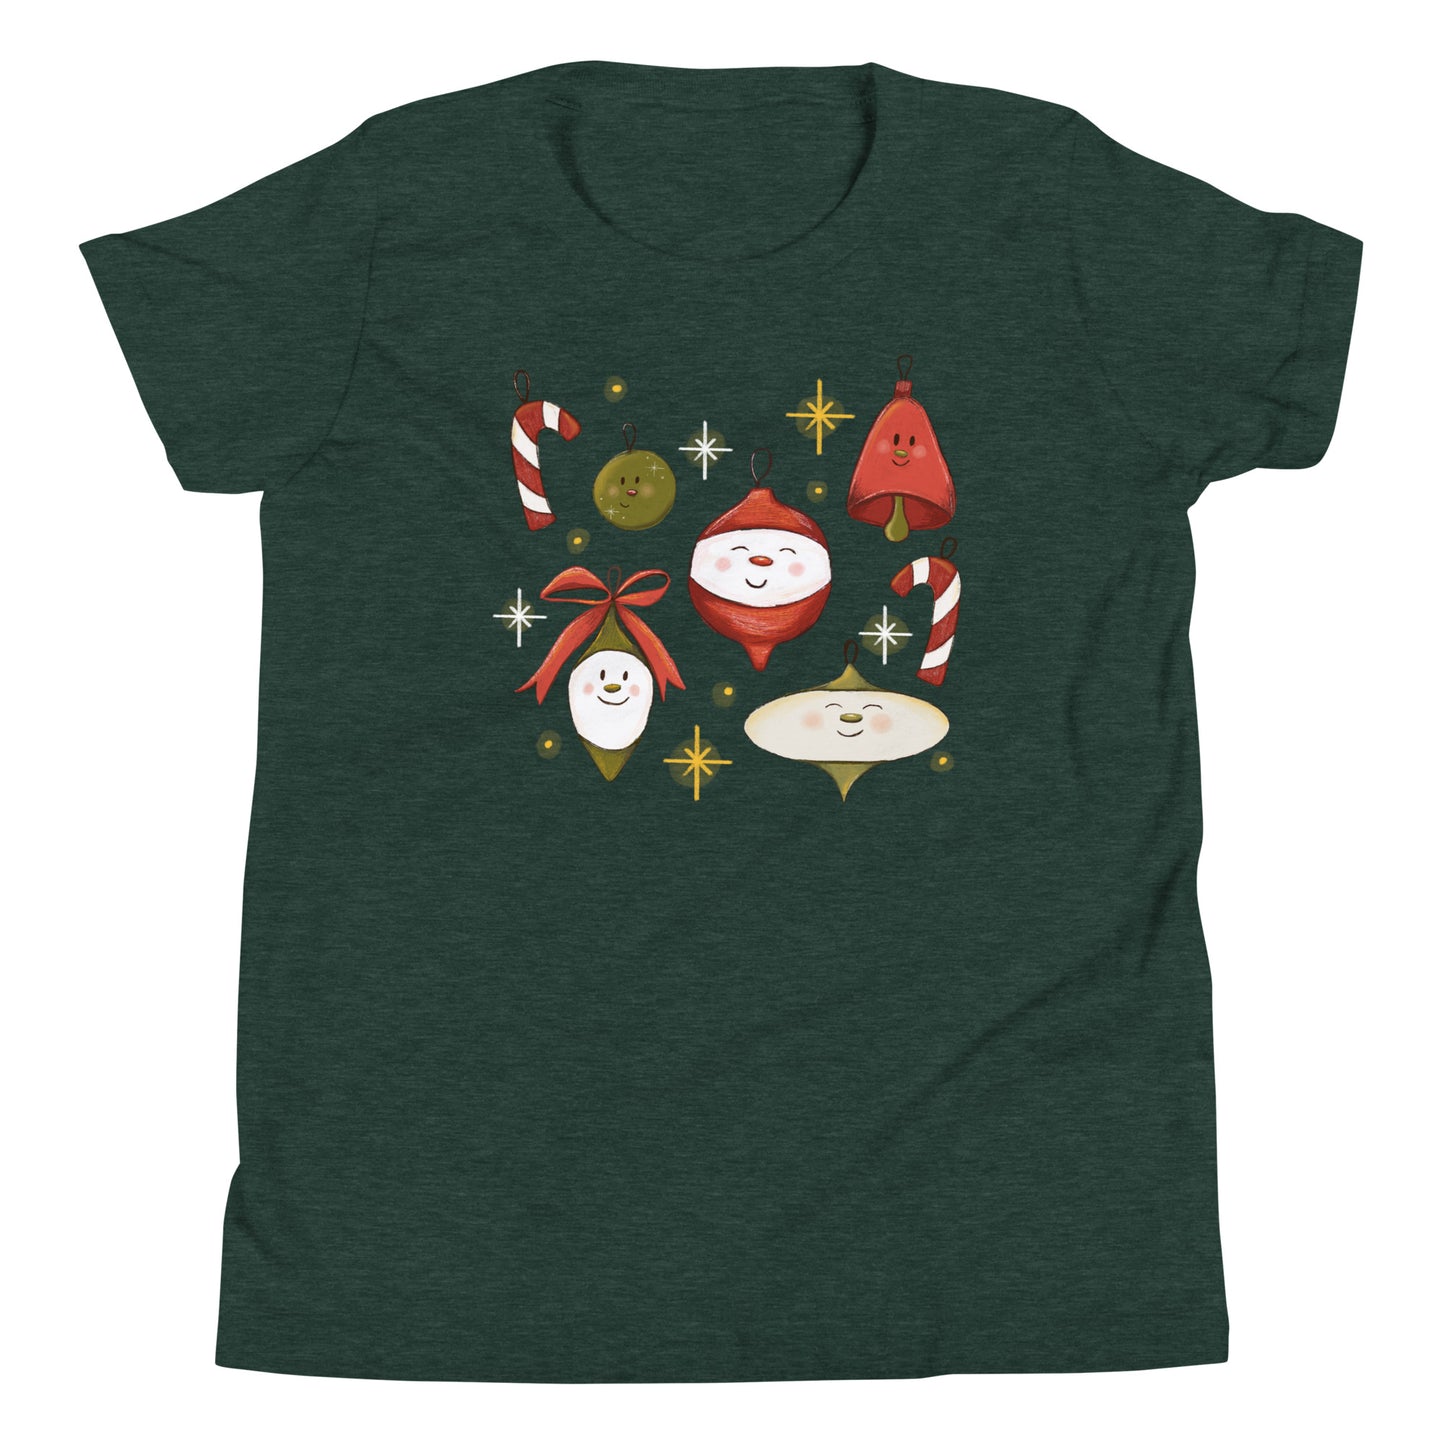 Youth Happy Christmas Ornaments T-Shirt